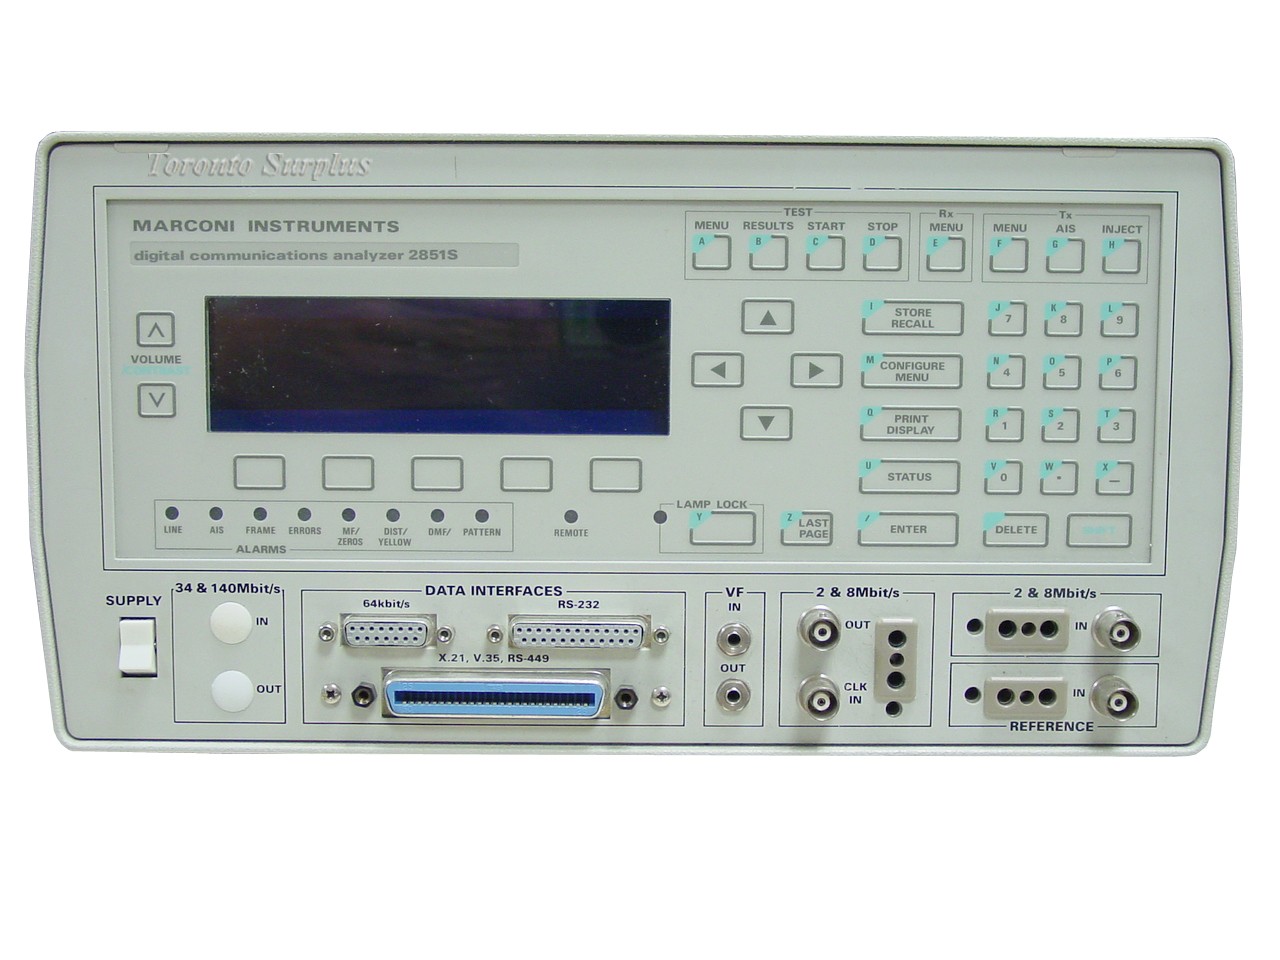 Marconi 2851S Digital Communications Analyzer OPT FITTED 01, 04, 13